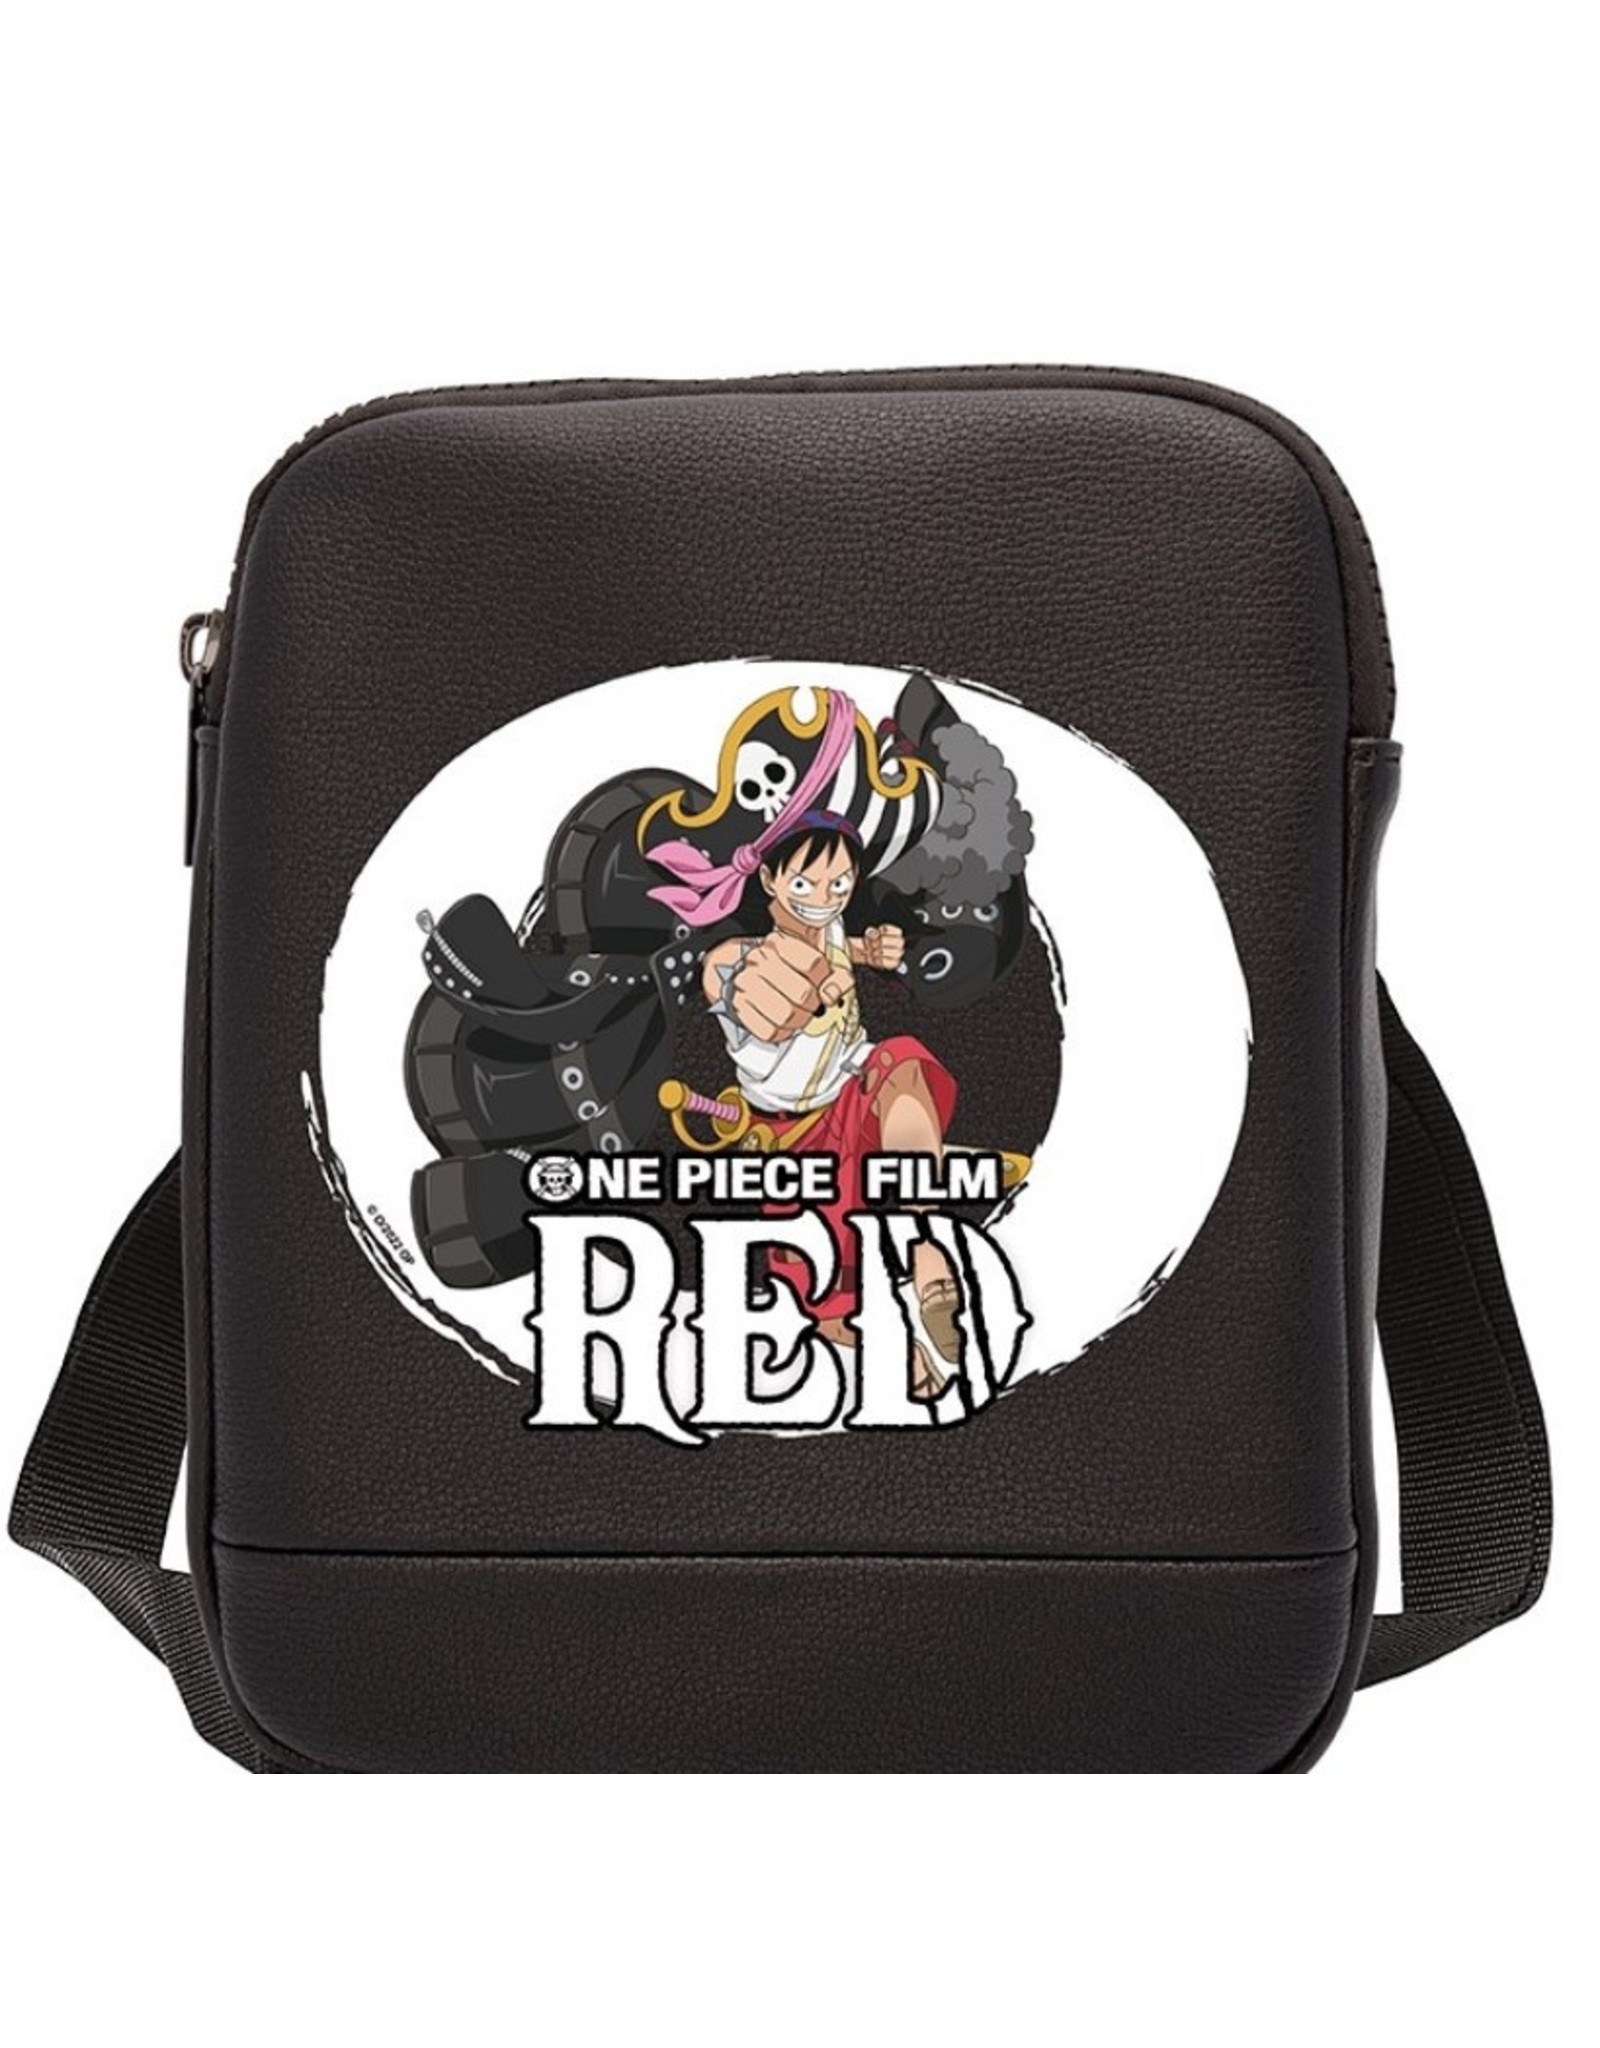 One Piece Merchandise bags - One Piece: Red - Messenger Bag  small